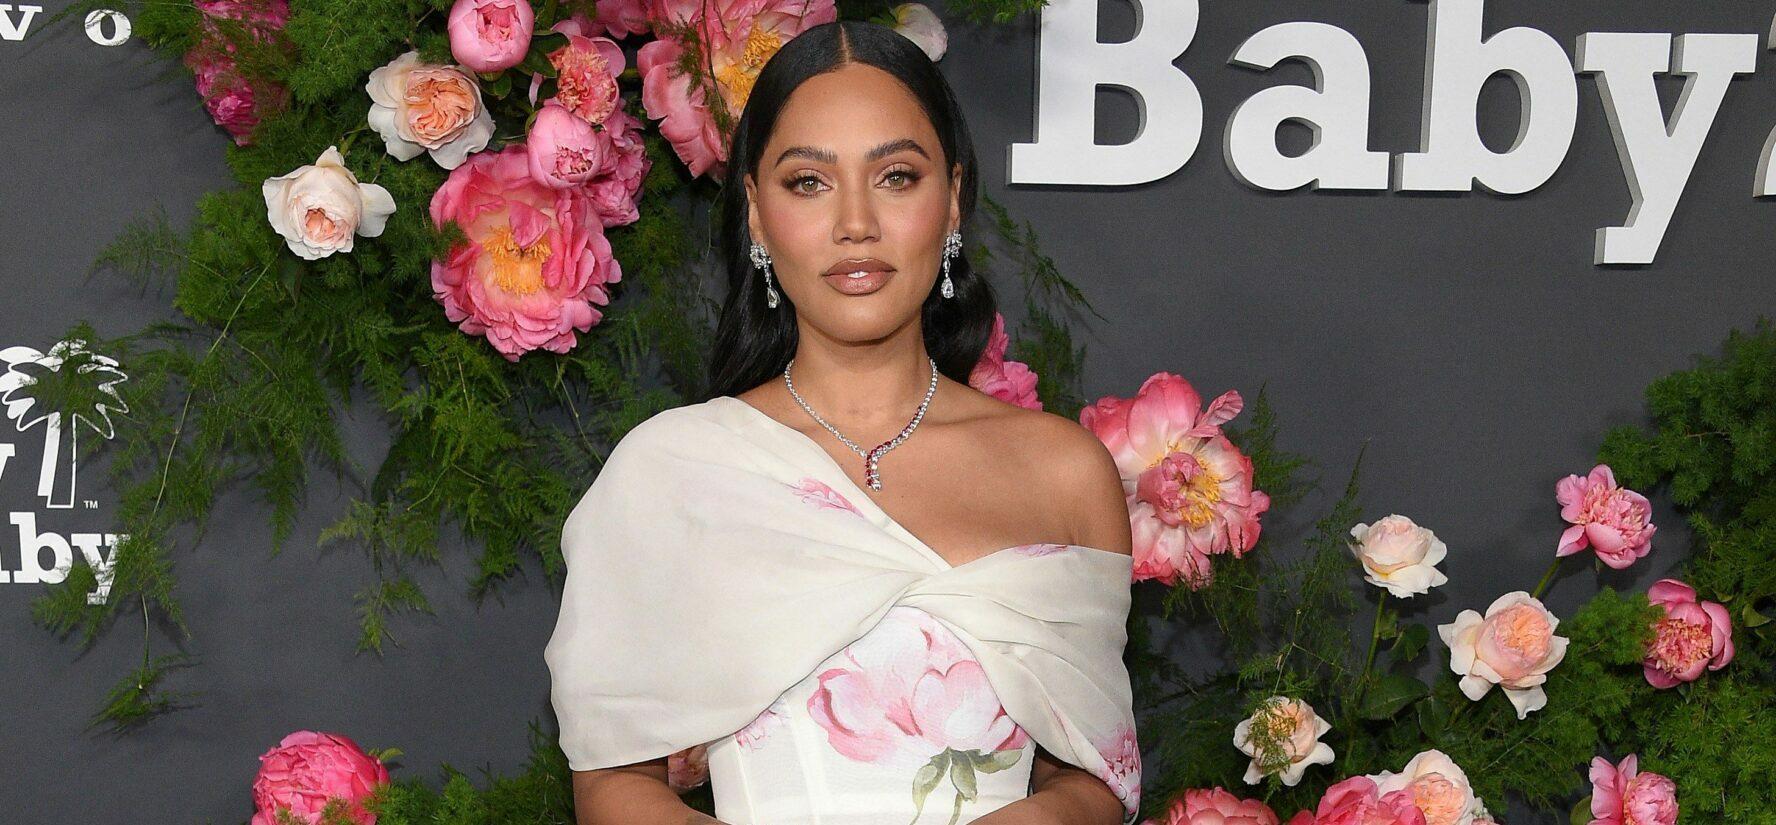 Ayesha Curry Opens Up About Her Health Journey And Kicking Off 2023 With New Goals